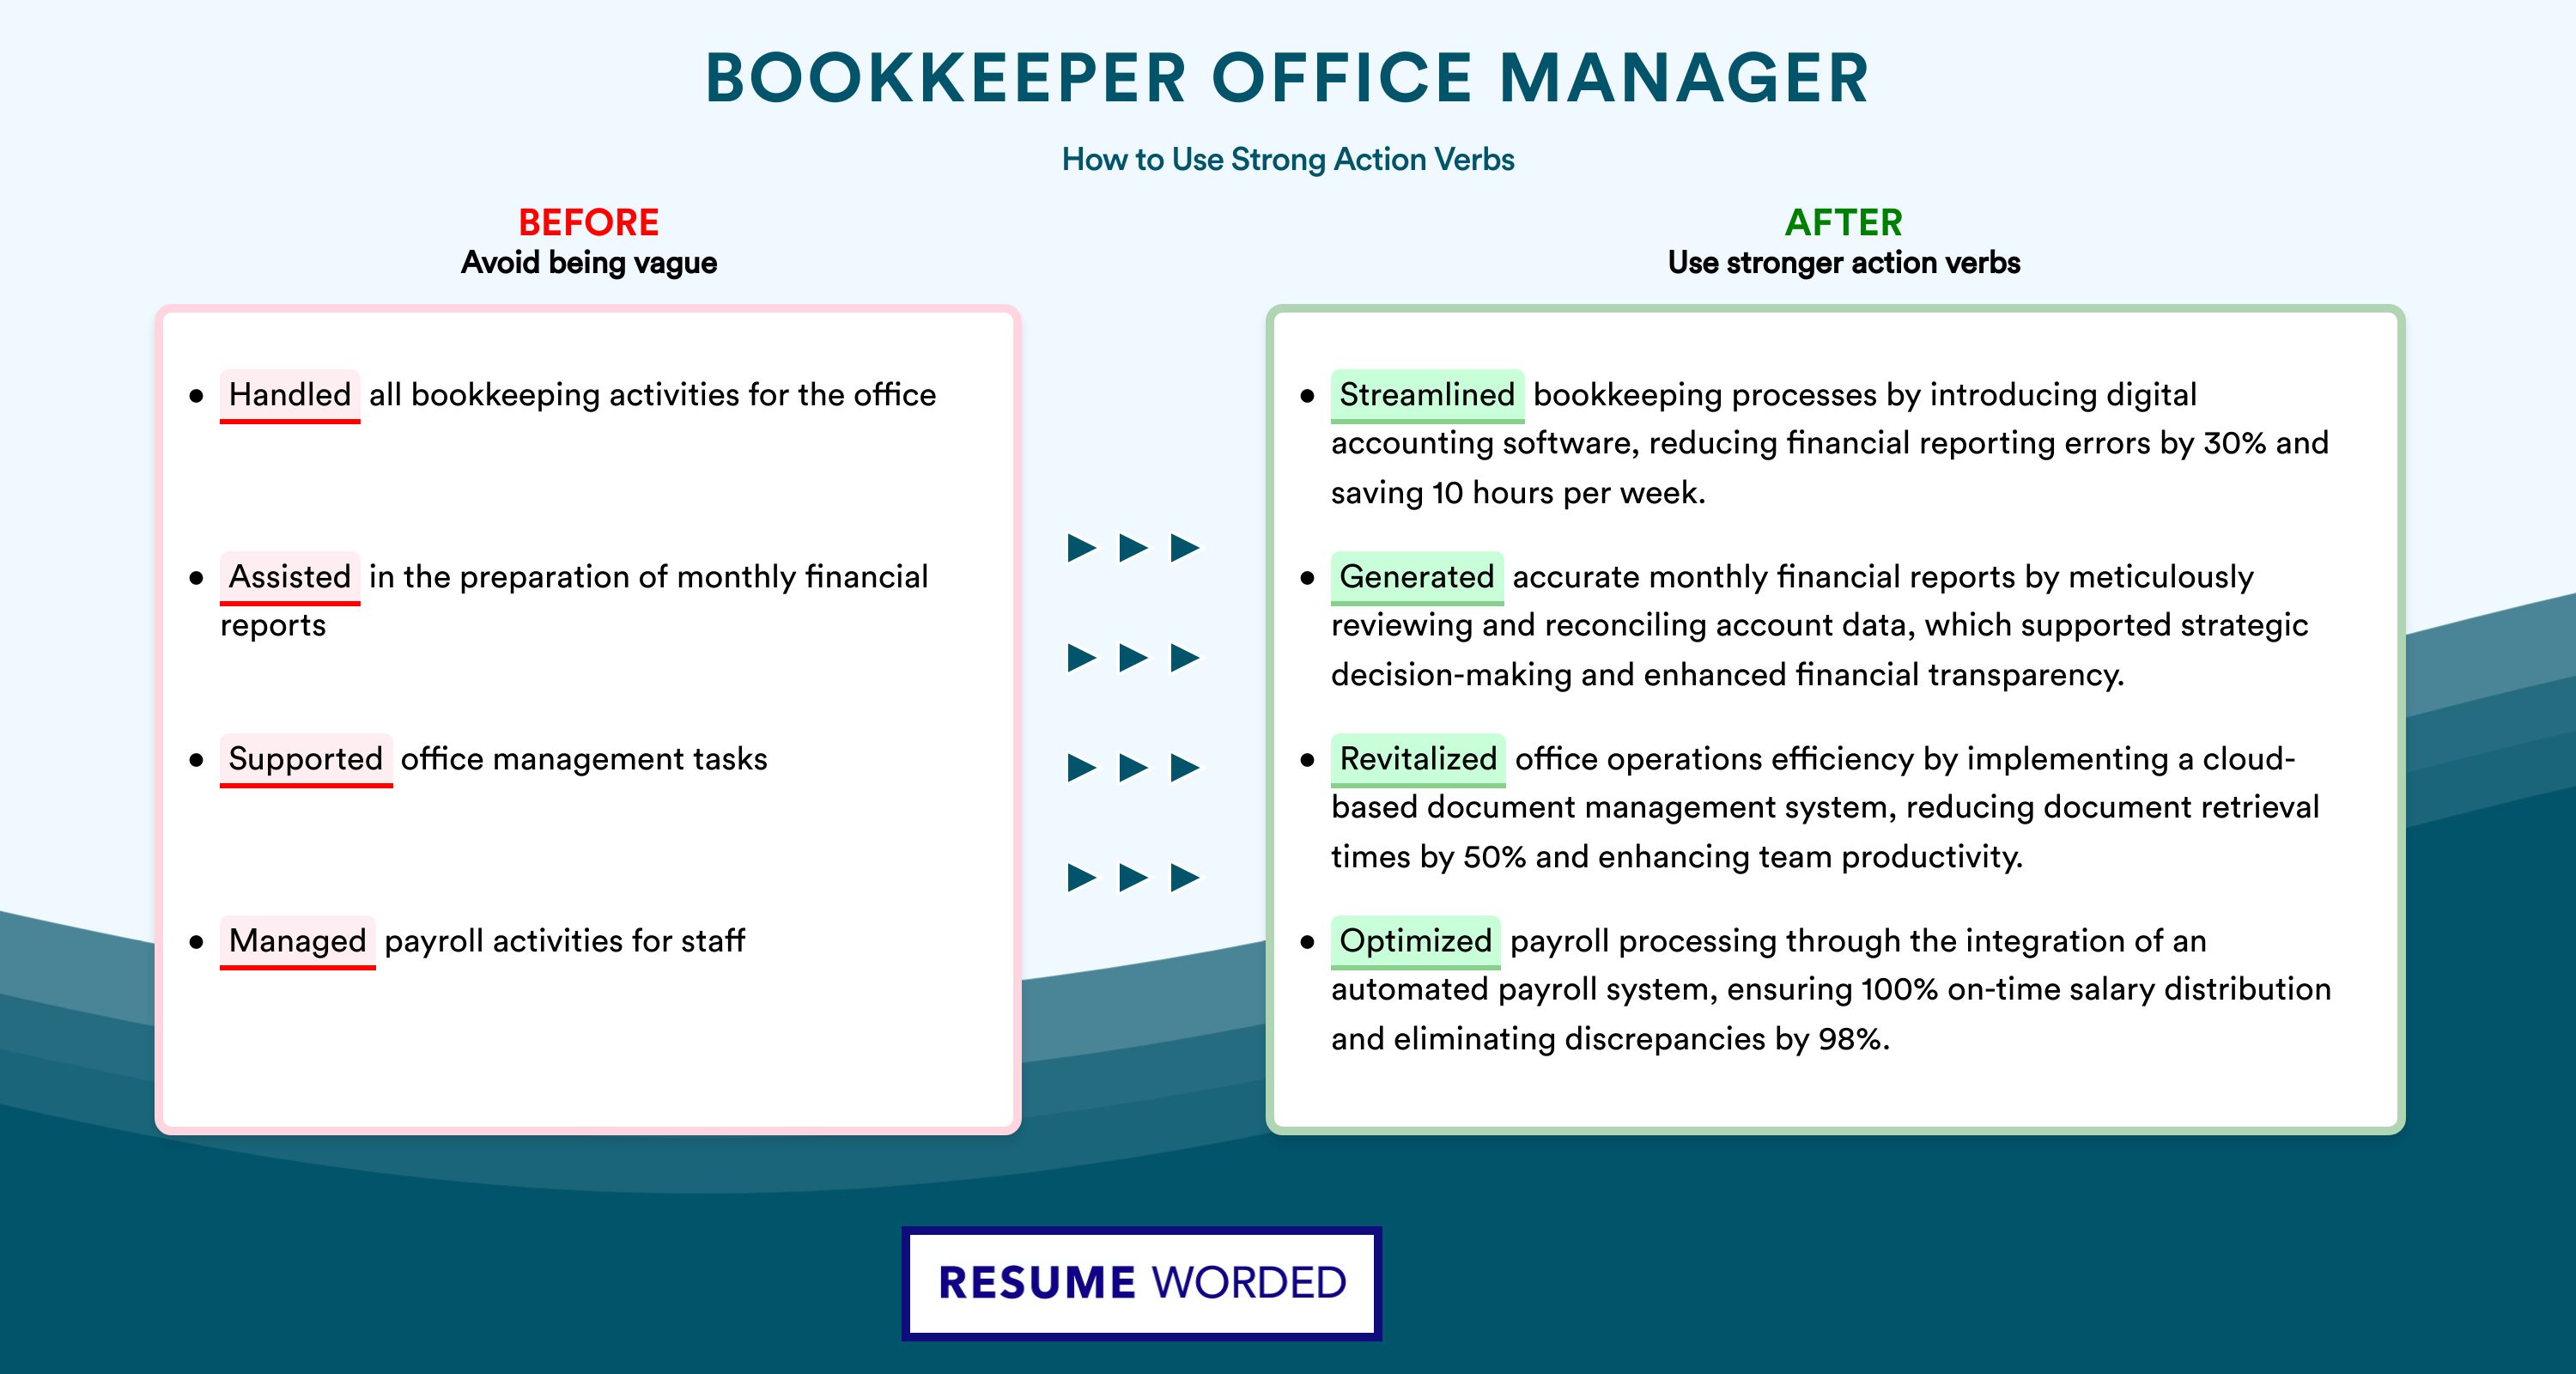 Action Verbs for Bookkeeper Office Manager